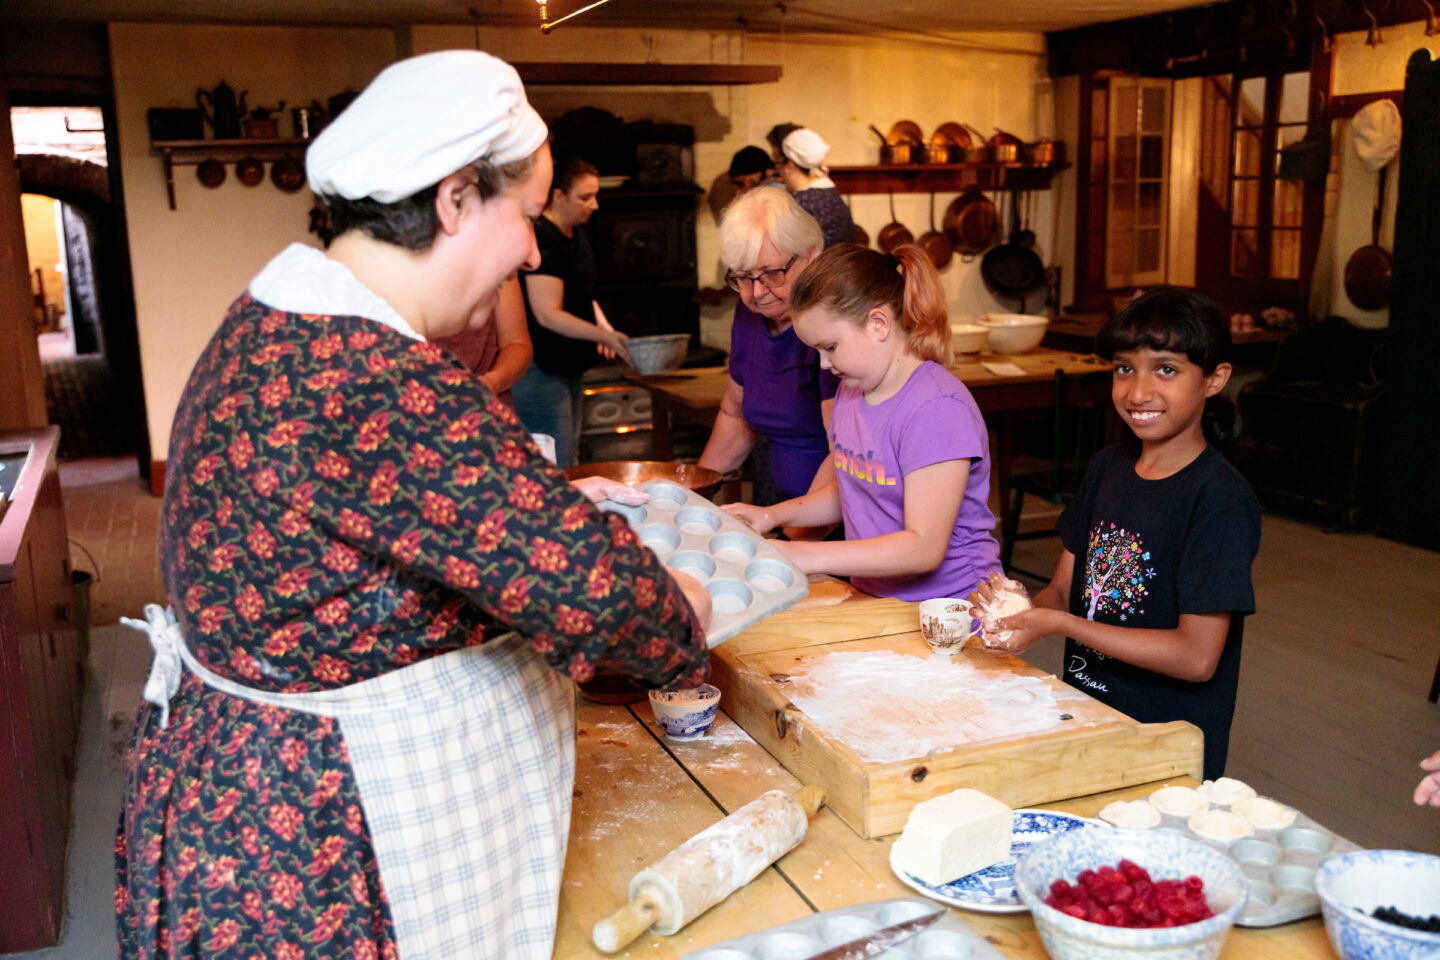 Bake, Find, Feast! A Family Friendly Historic Cooking Workshop